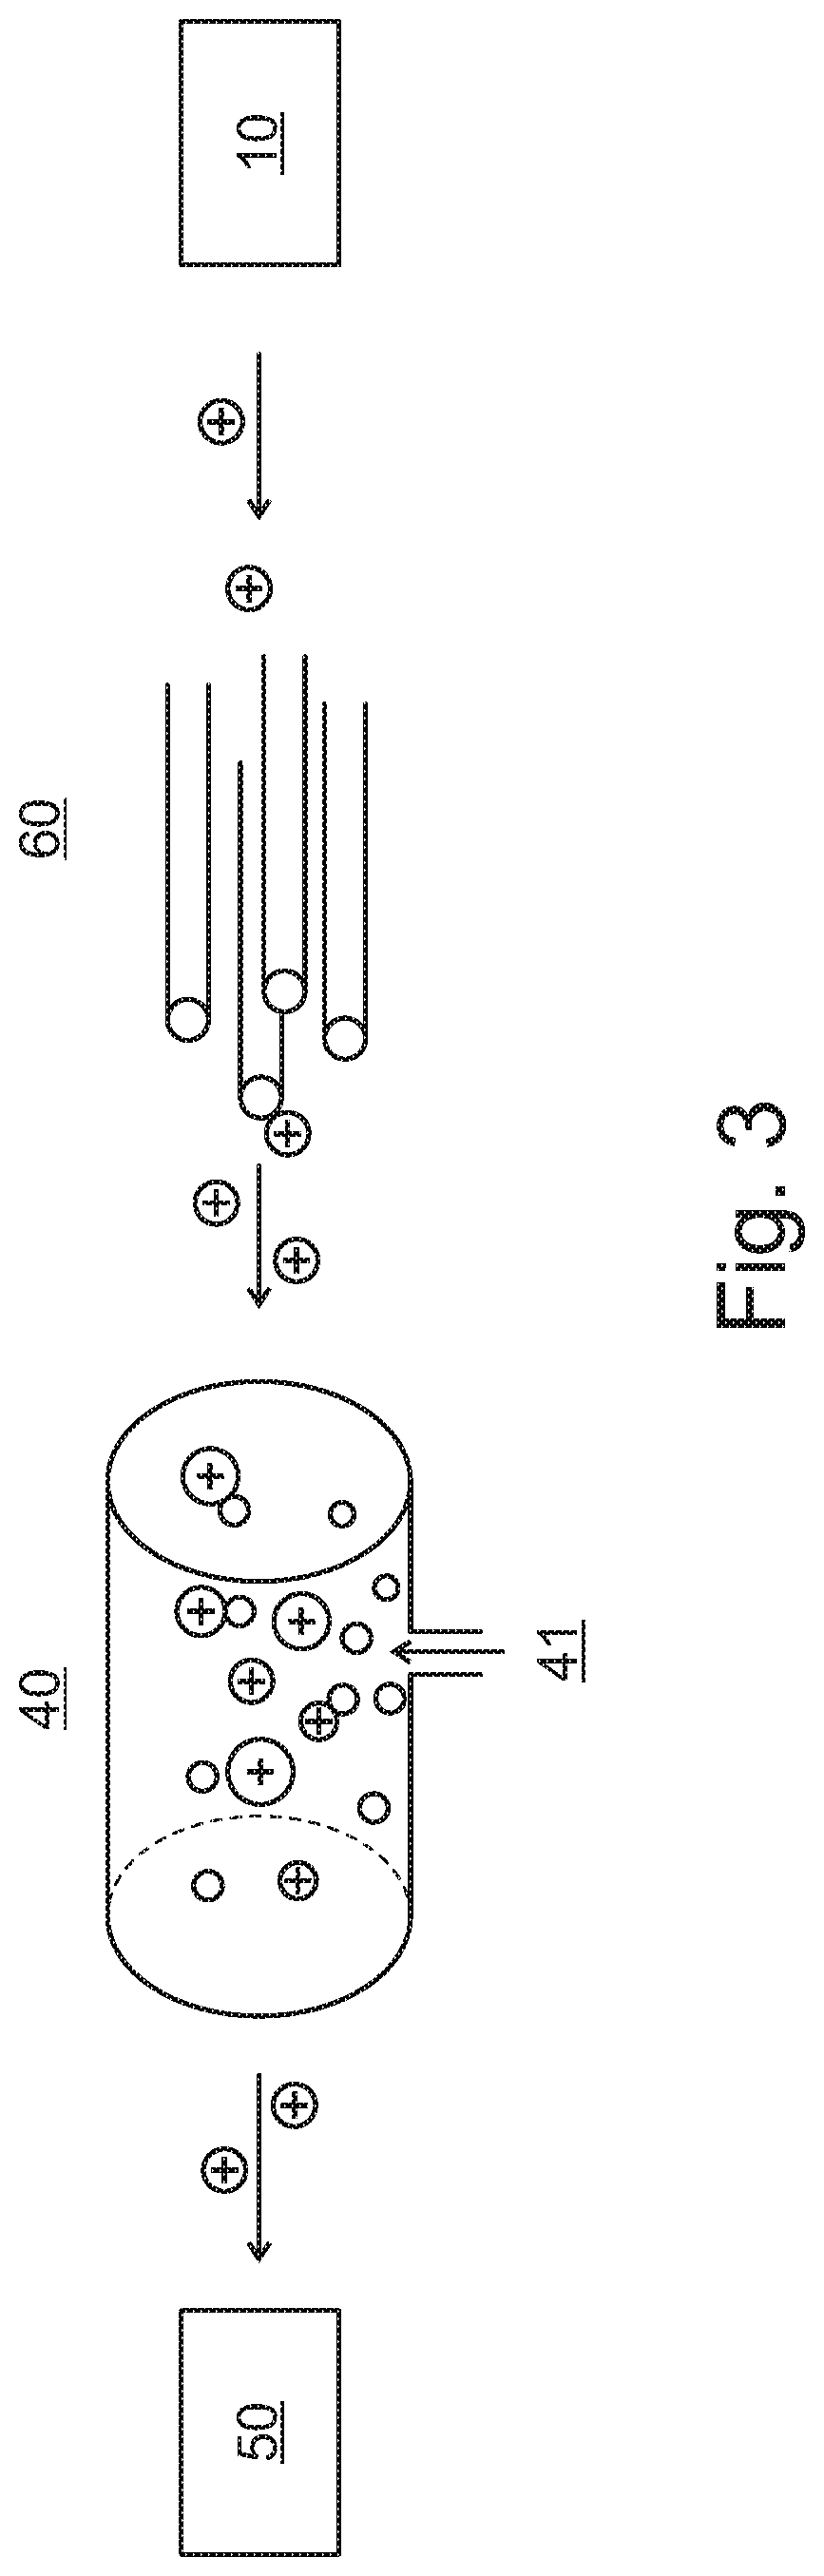 Methods in mass spectrometry using collision gas as ion source